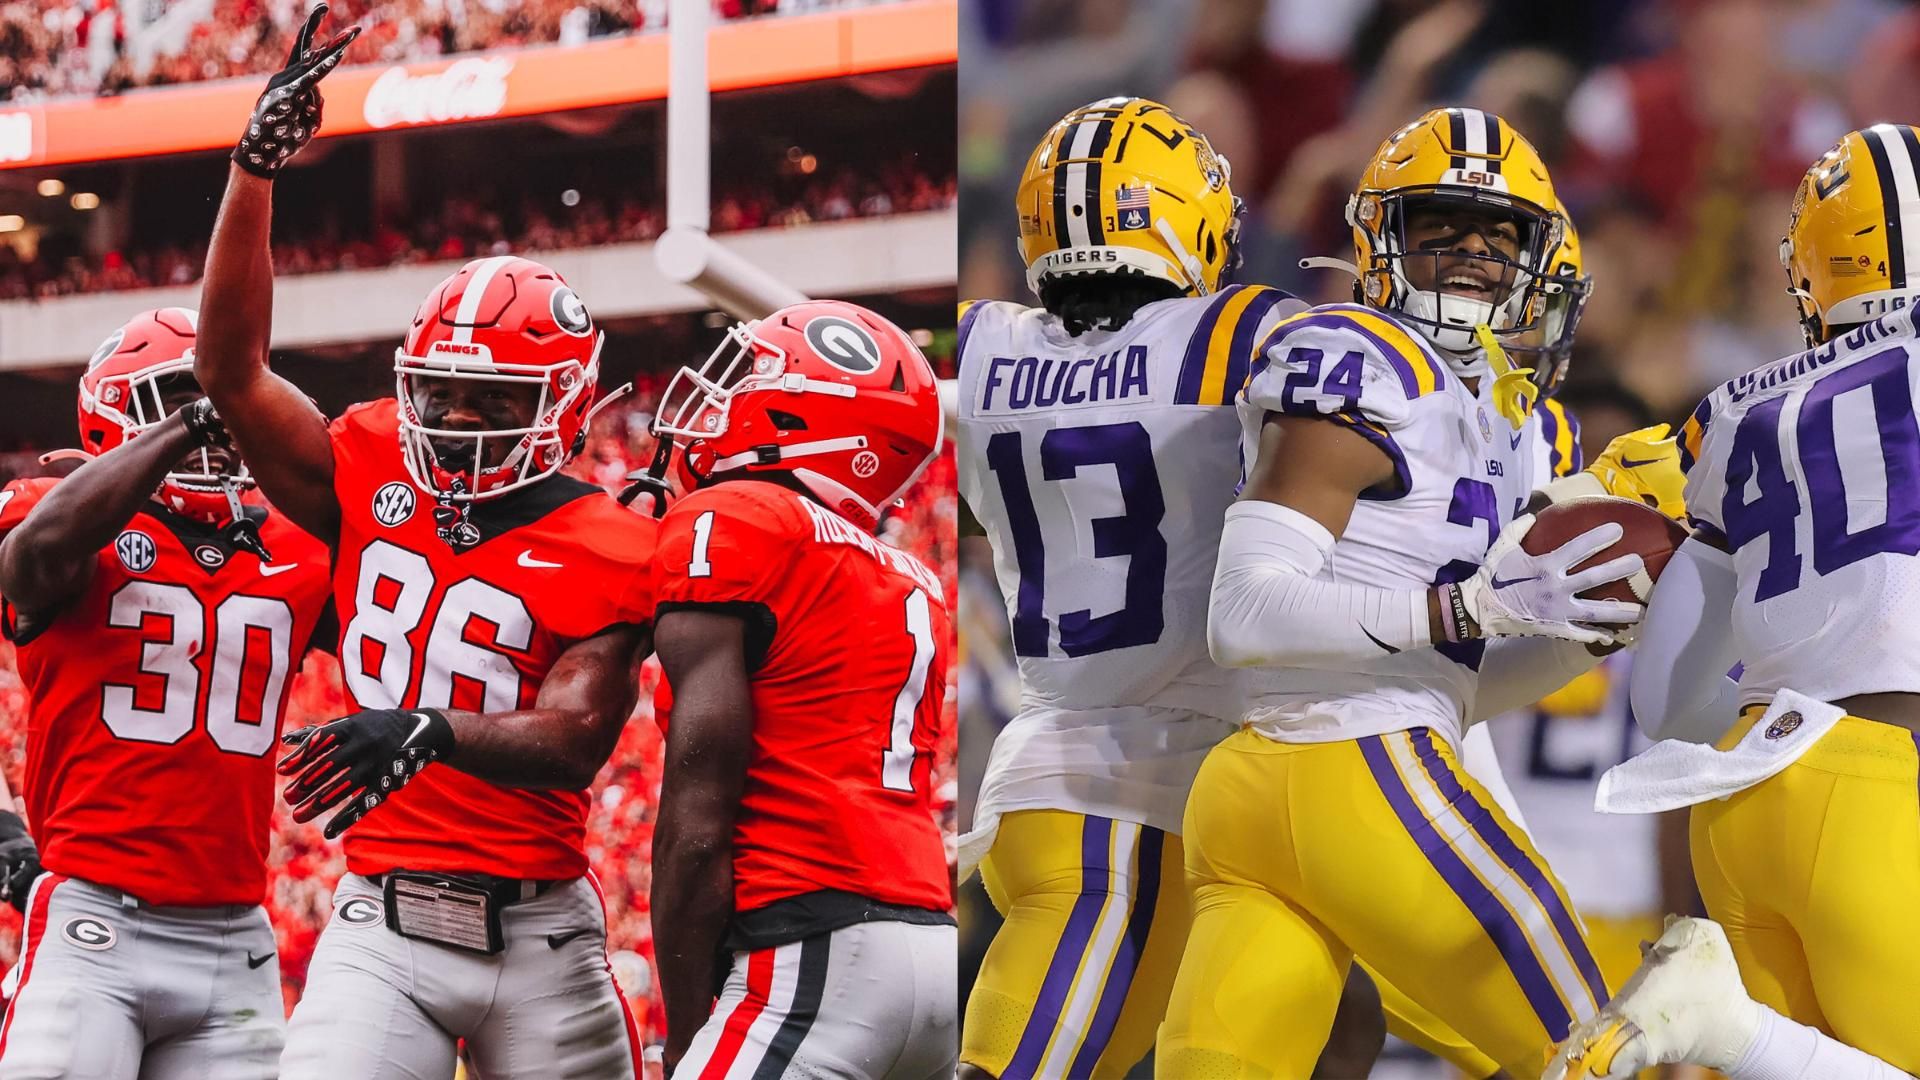 What to expect in SEC Championship Game: UGA vs. LSU - ESPN Video